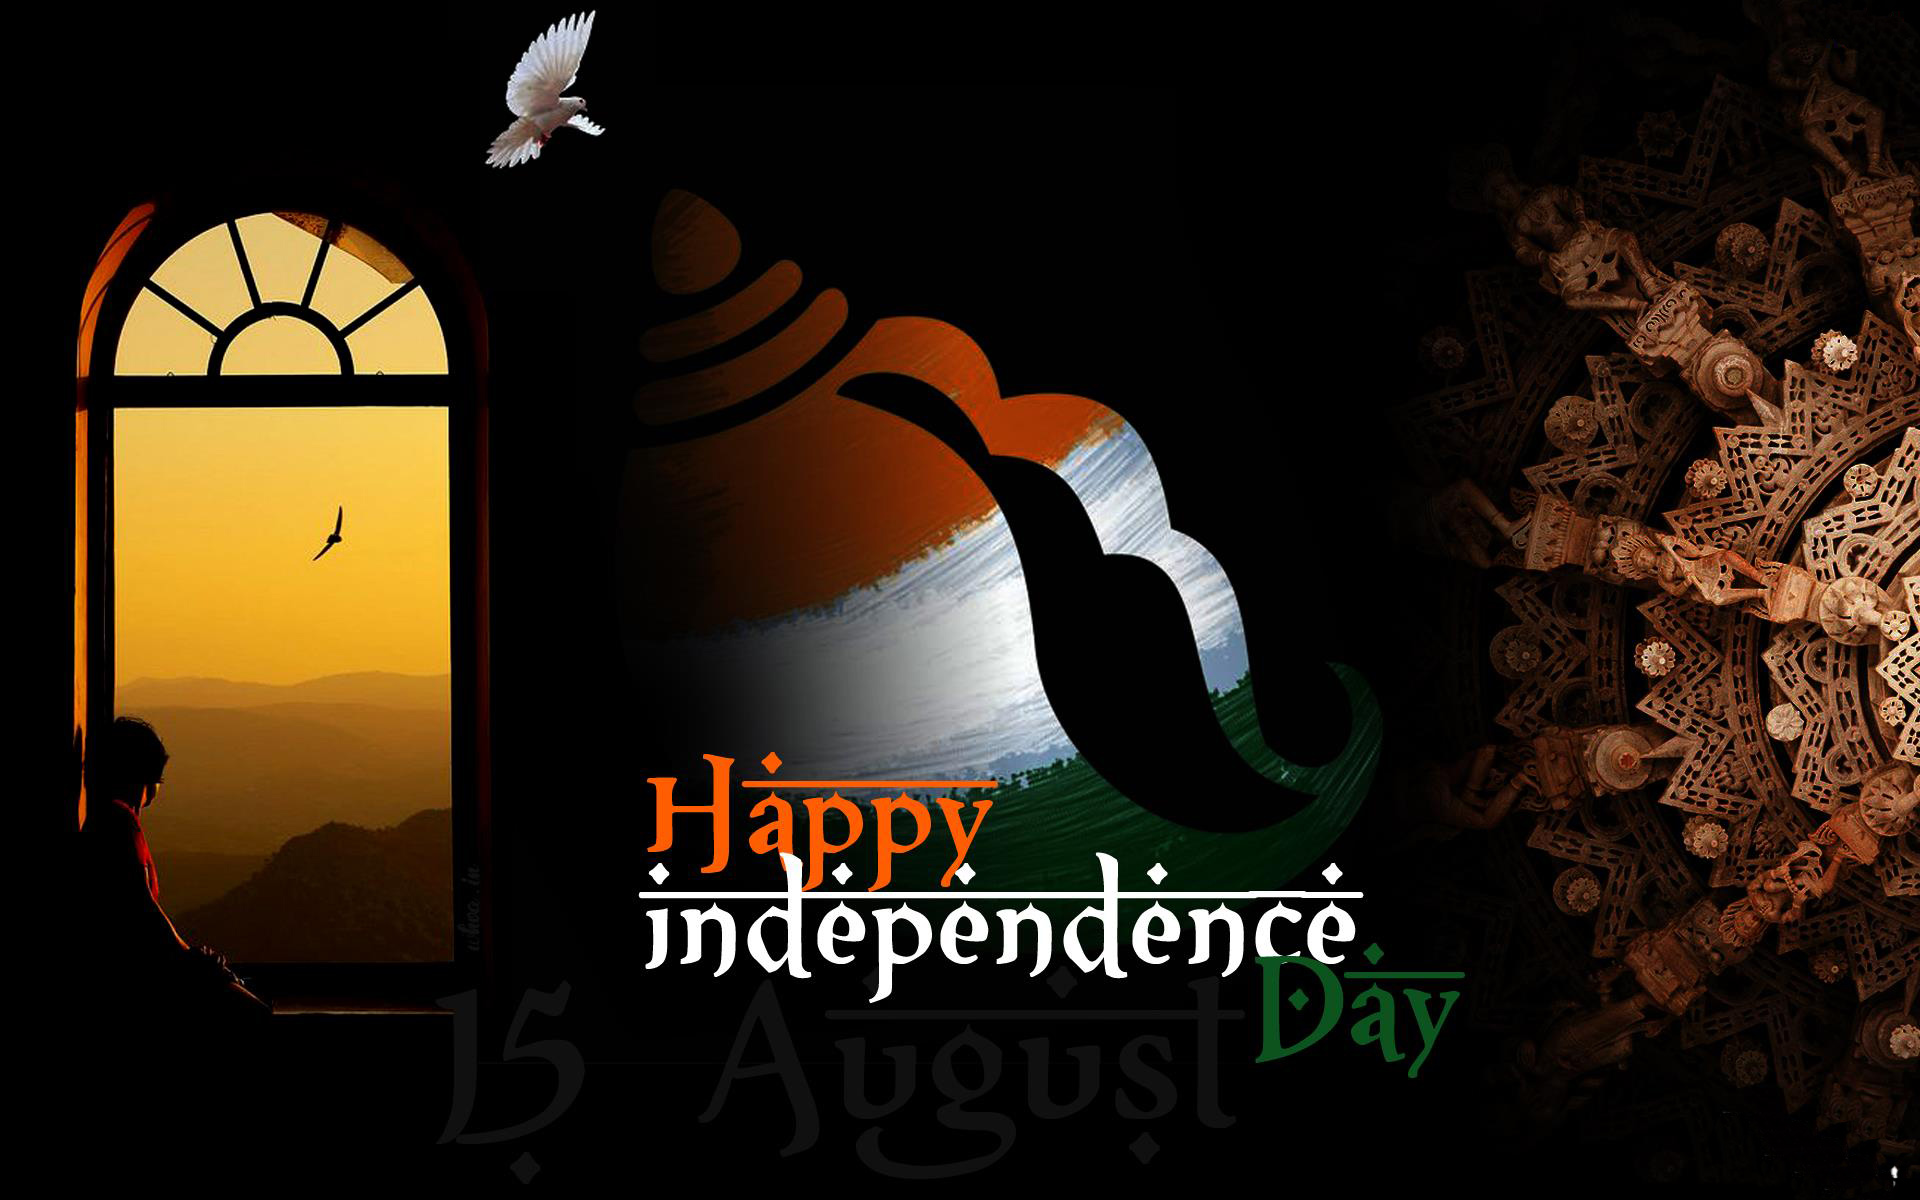 72nd Happy Independence Day 2018 Quotes Sms Messages Wallpapers Pics Whatsapp Status Dp Images